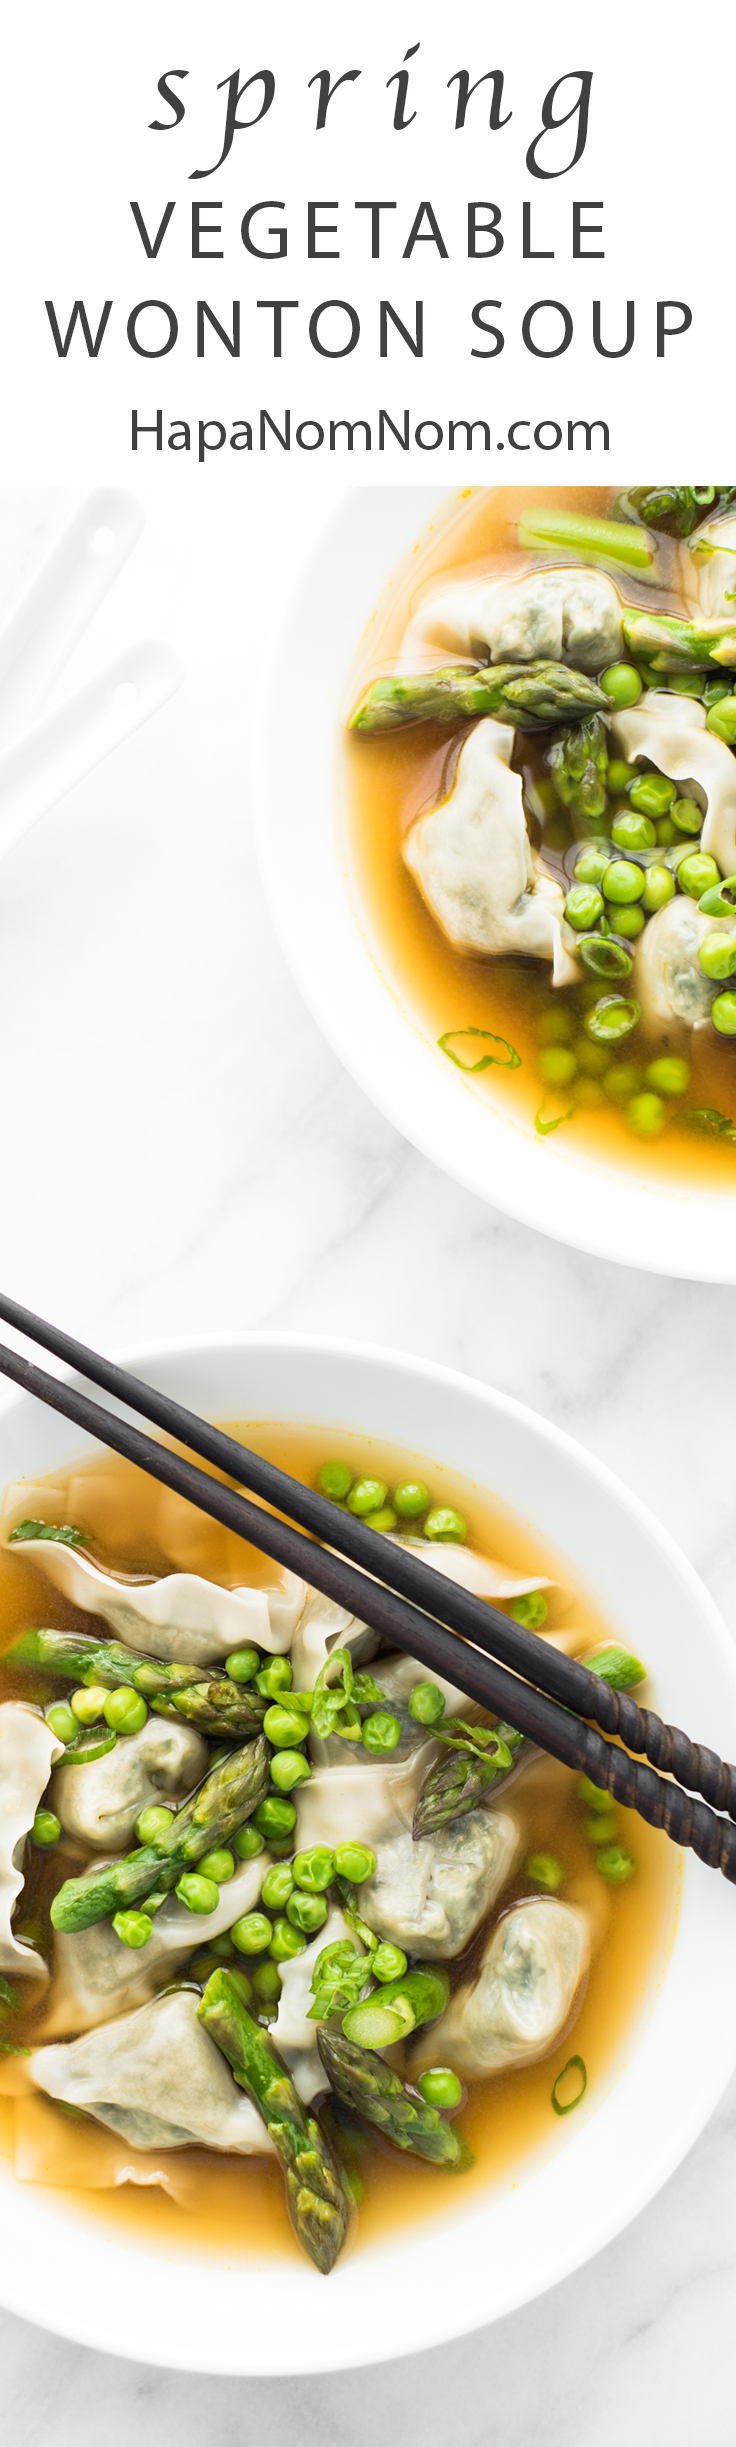 Embrace the season and make this easy Spring Vegetable Wonton Soup! Vegetarian/Vegan friendly + a VIDEO!